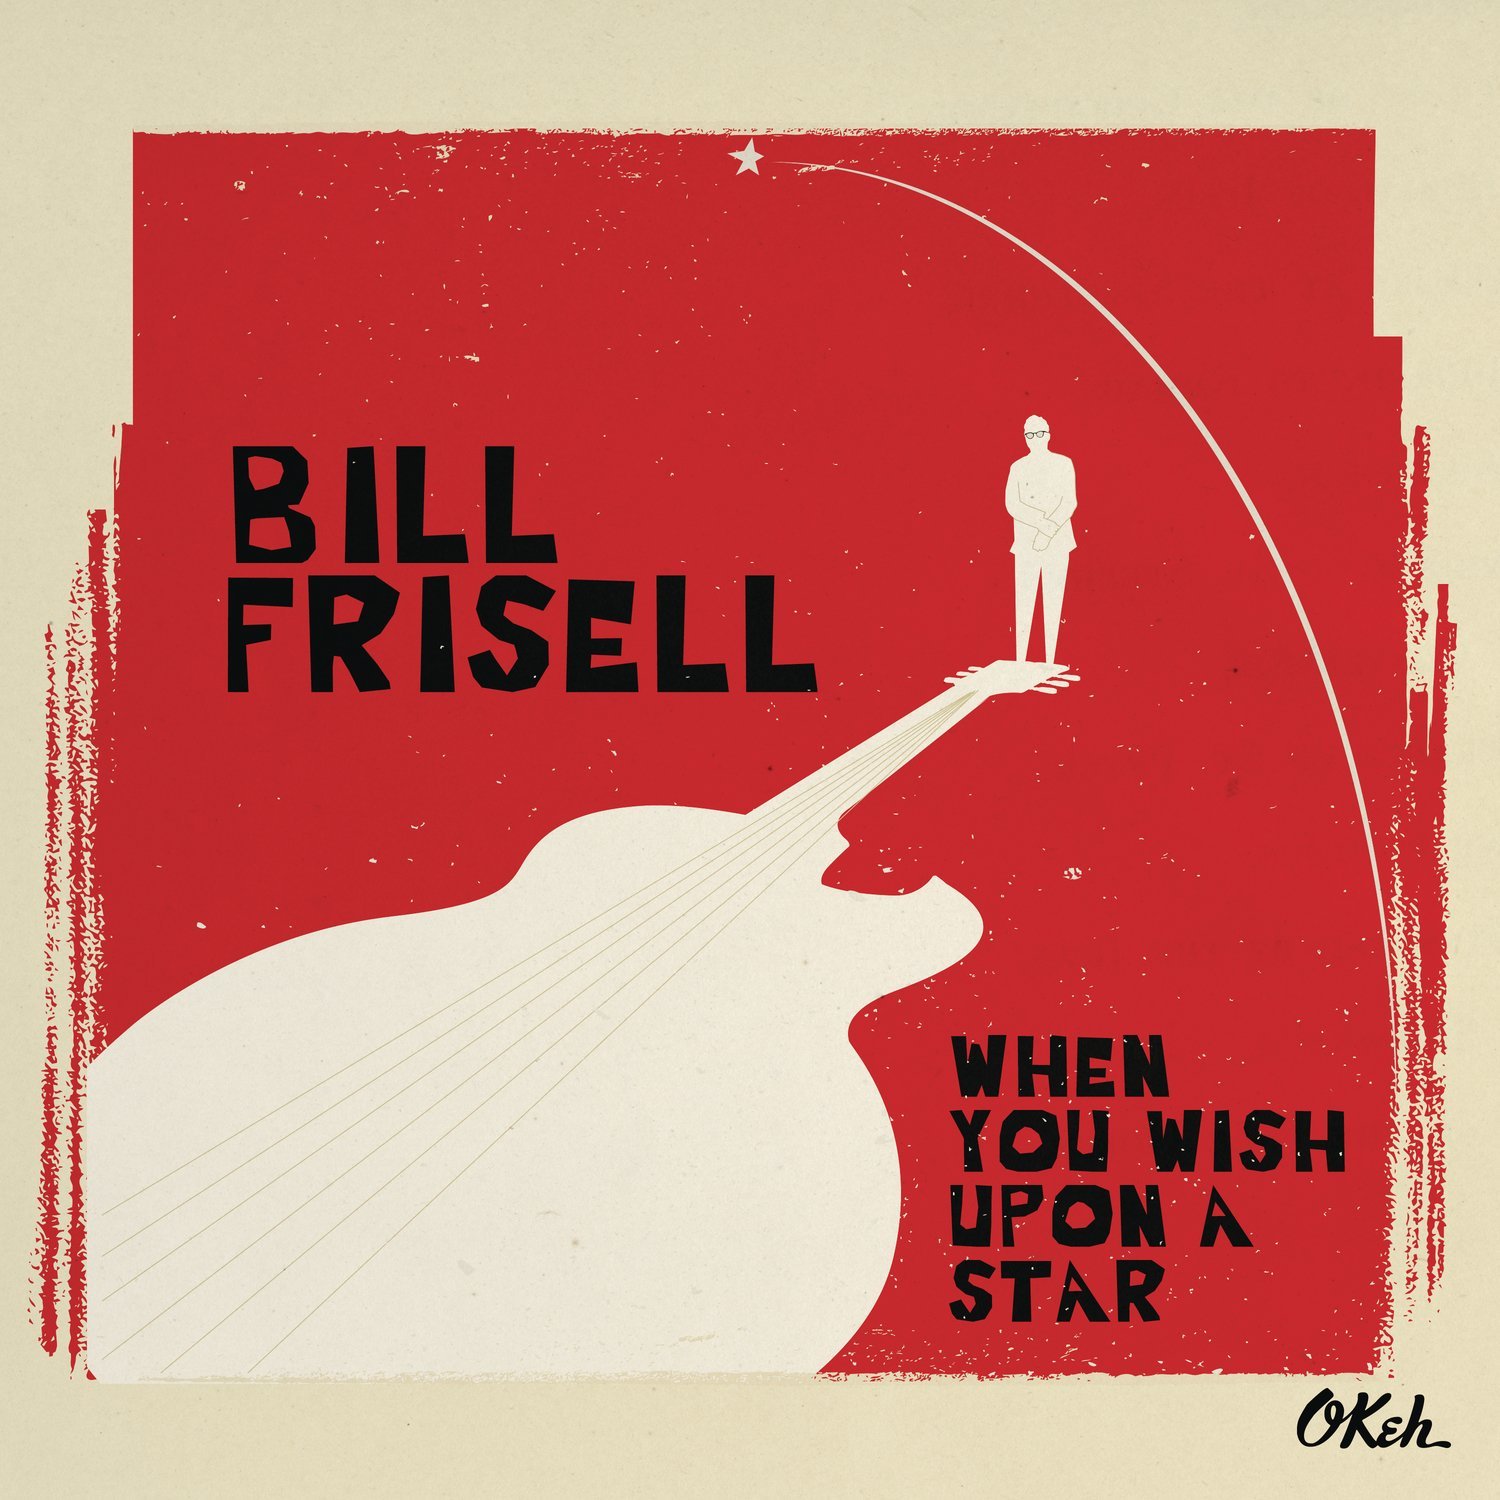 Bill Frisell – When You Wish Upon A Star (2016) [HDTracks FLAC 24bit/96kHz]